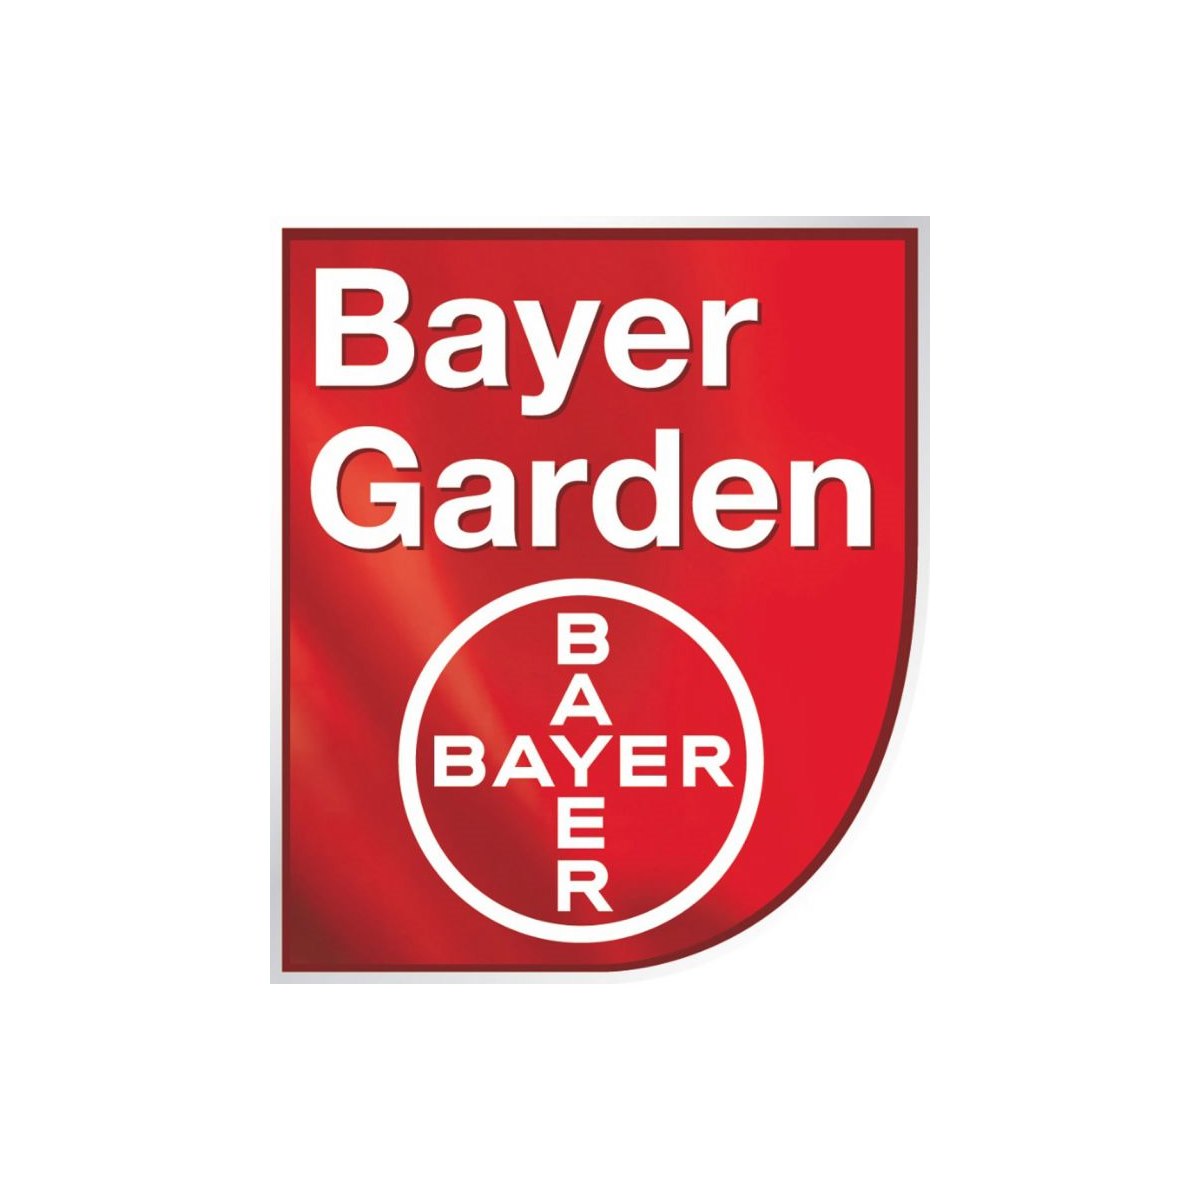 Where to Buy Bayer Products